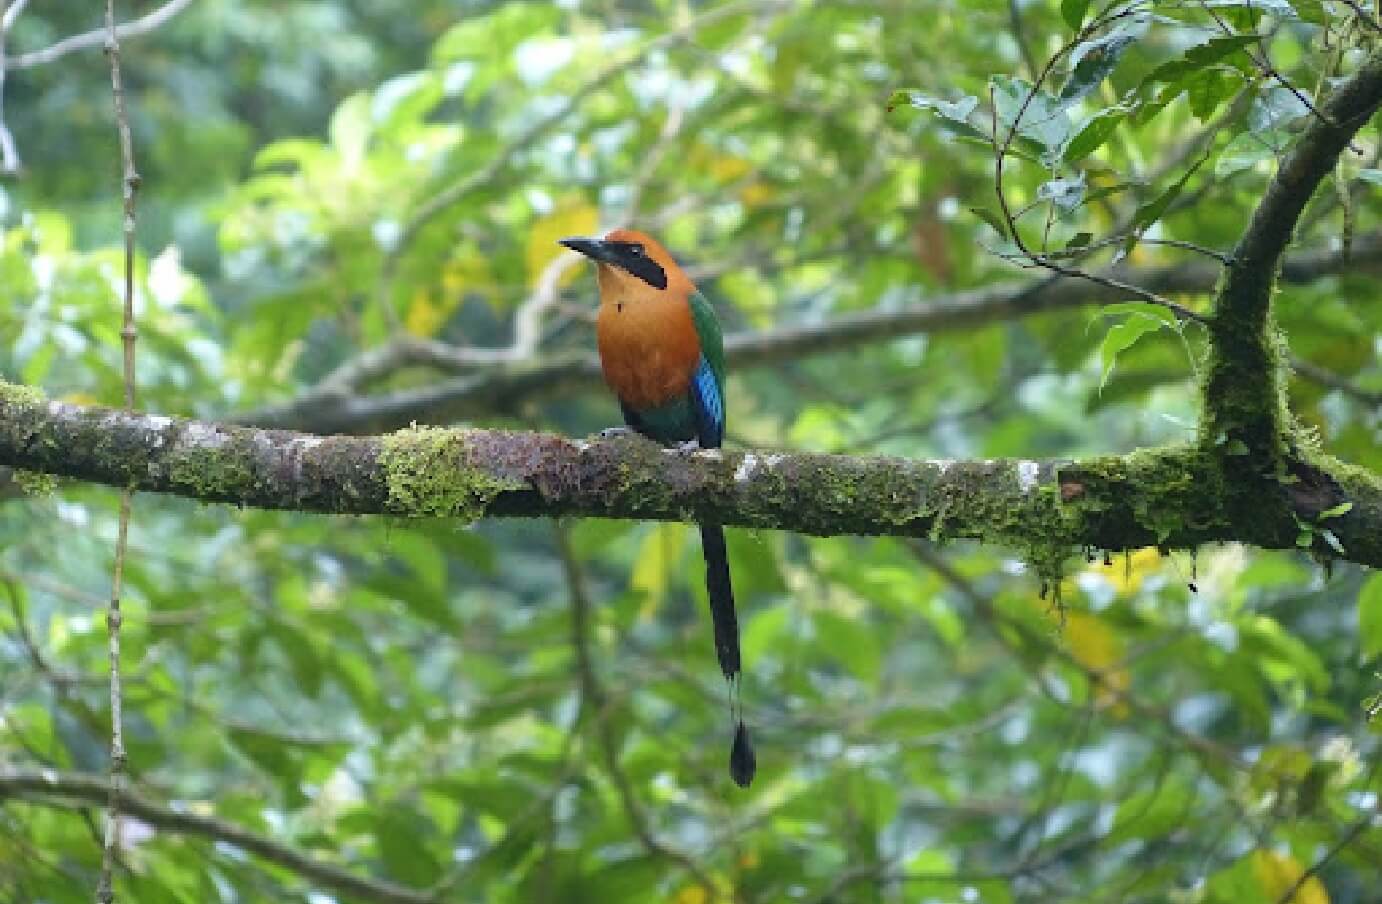 zoomed out shot of a Motmot perchec on a tree, amonsgt thick branches and leaves